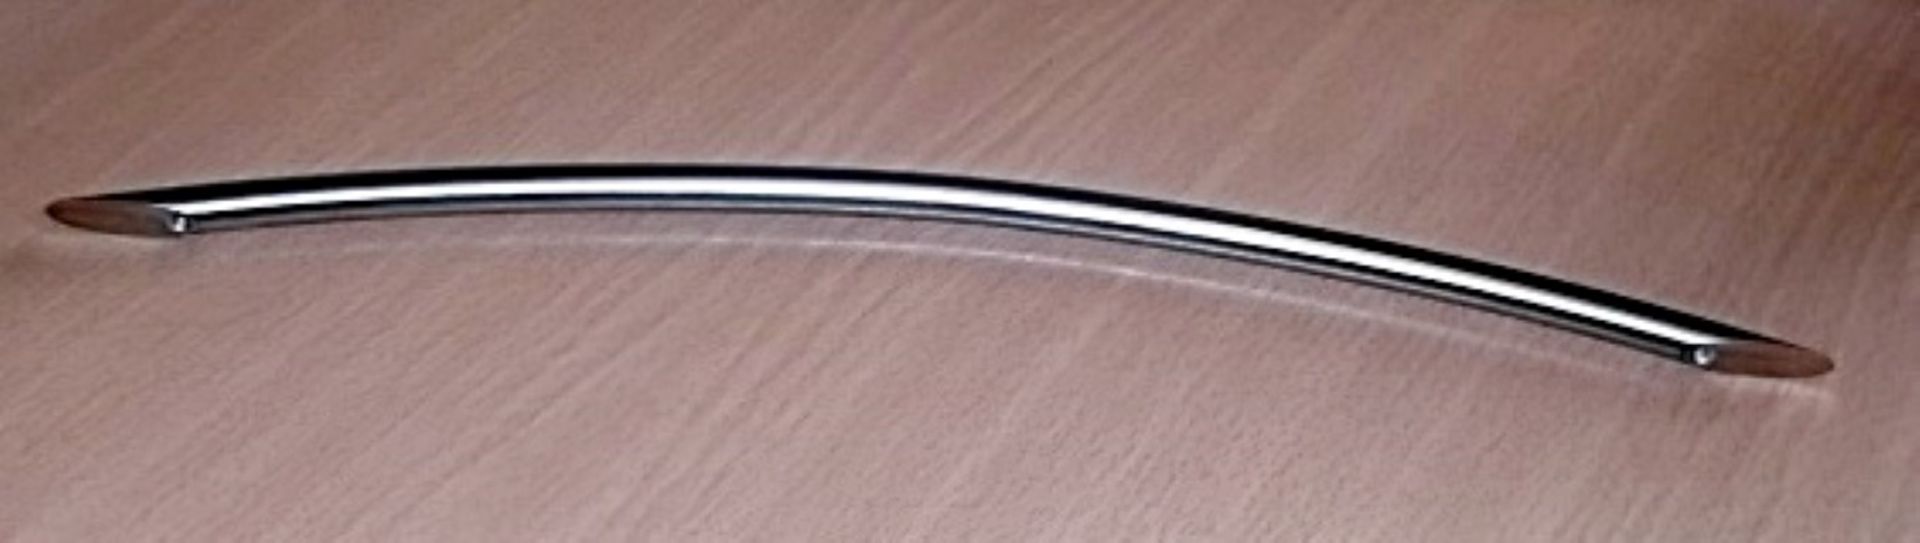 250 x BOW Handle Kitchen Door Handles - 320mm - New Stock - Brushed Nickel Finish - Fixings Included - Image 20 of 20